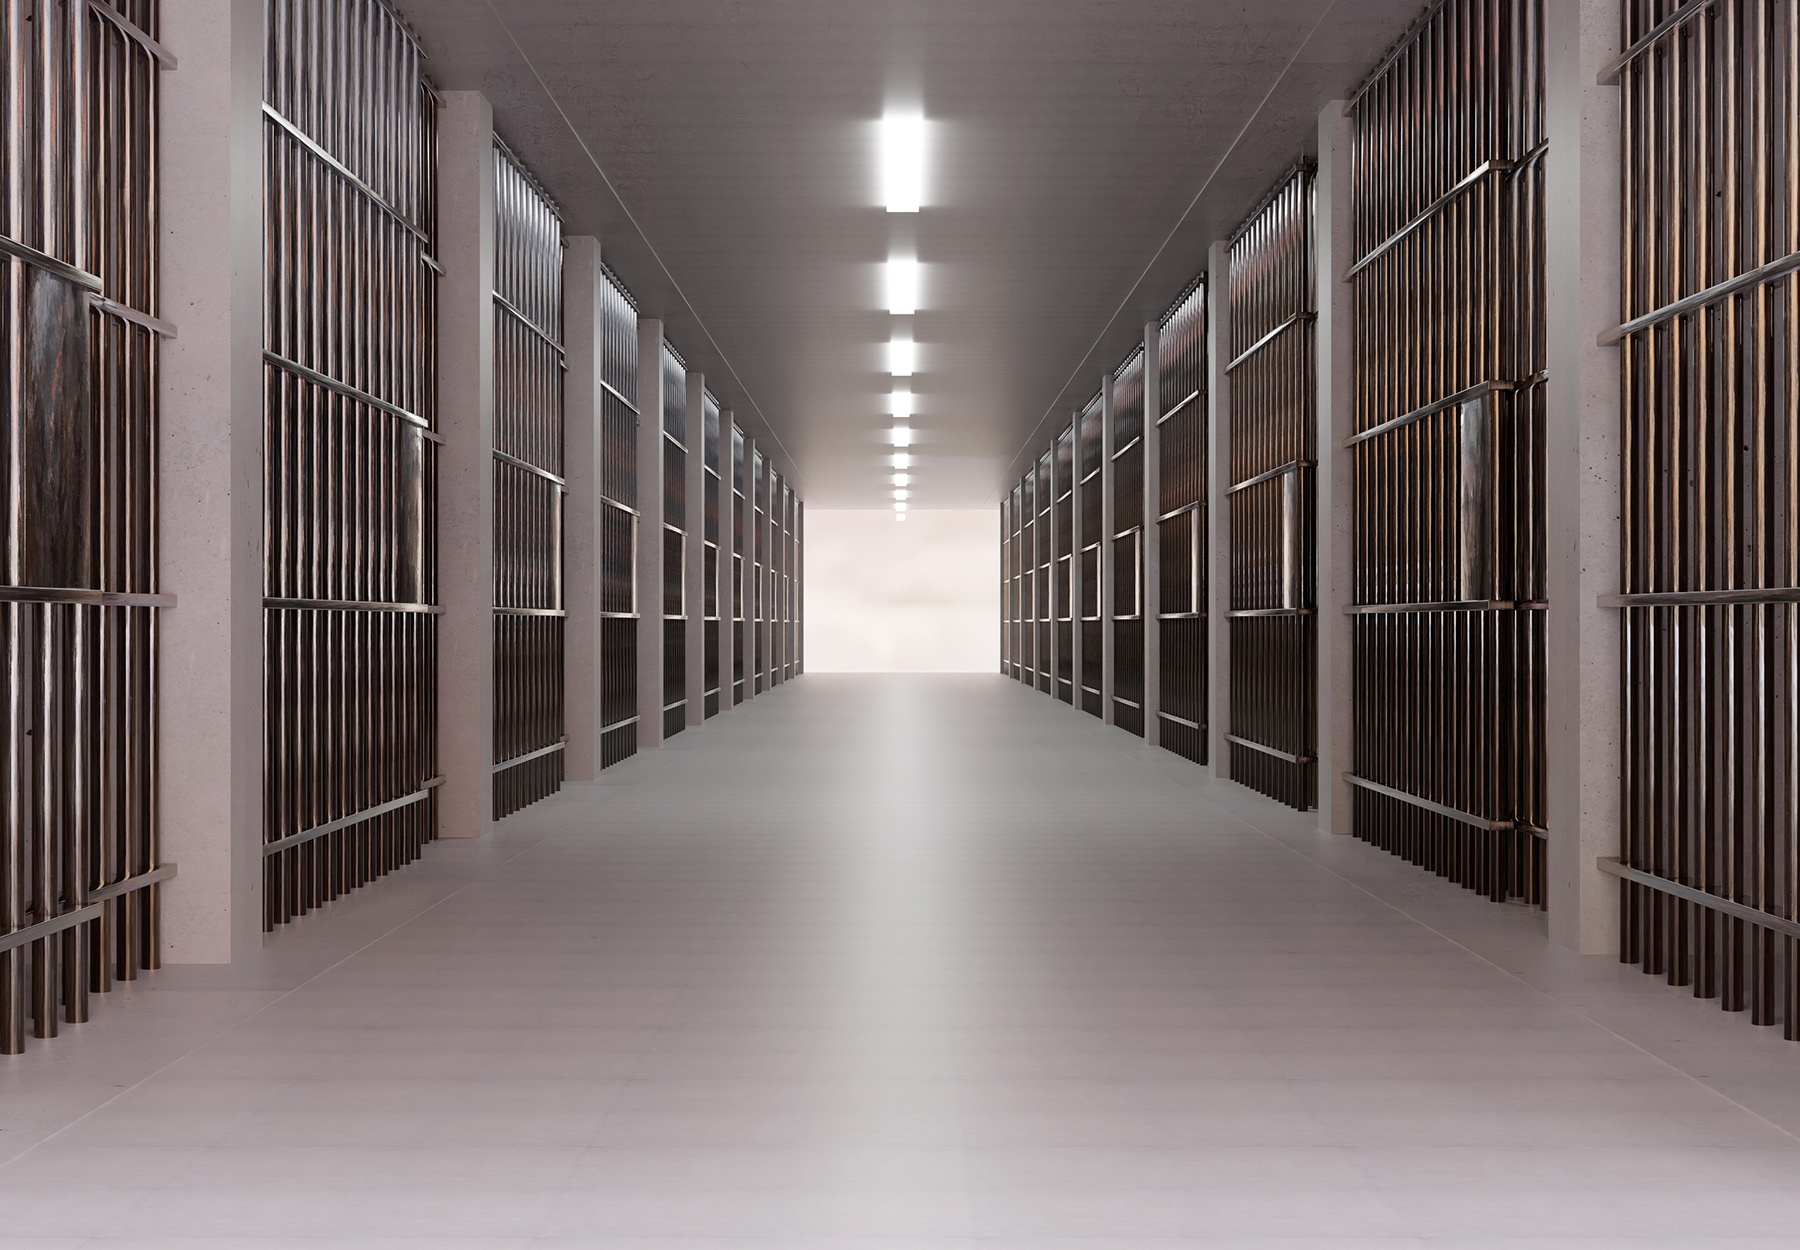 Prison facility hall interior, jail cell with metal bars and empty building corridor, dark background. Conviction and incarceration concept, 3d render. Prison time. iStock image.